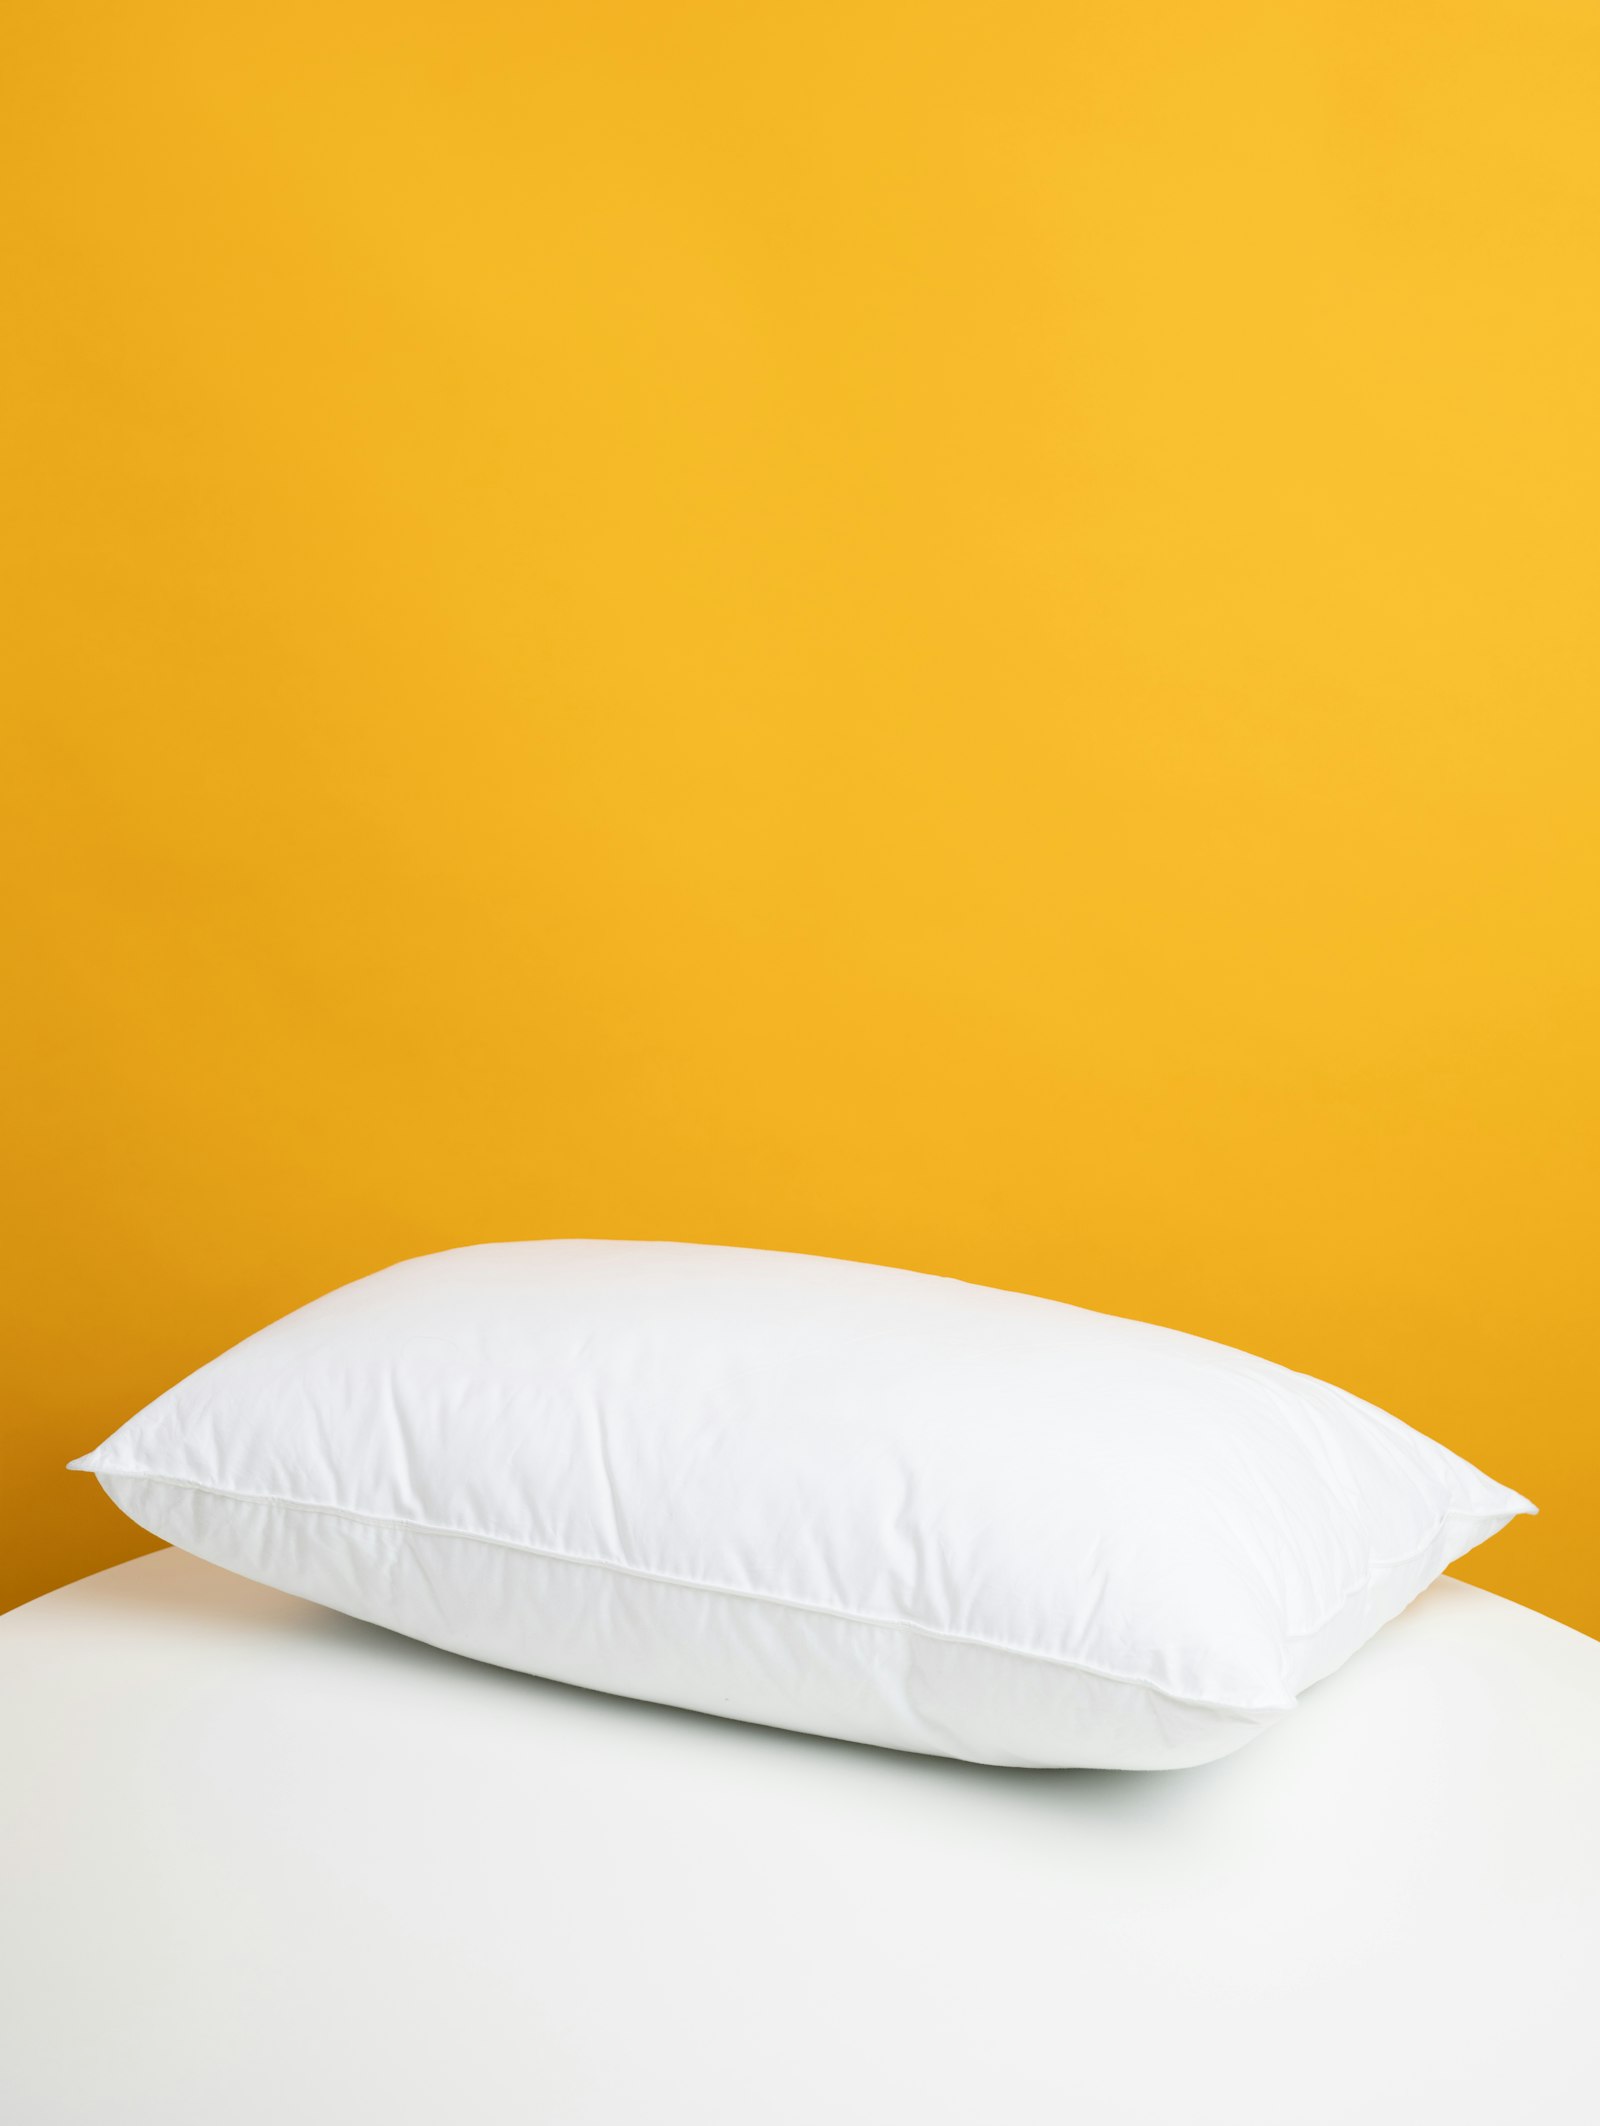 Sony a7R III sample photo. White pillow on white photography